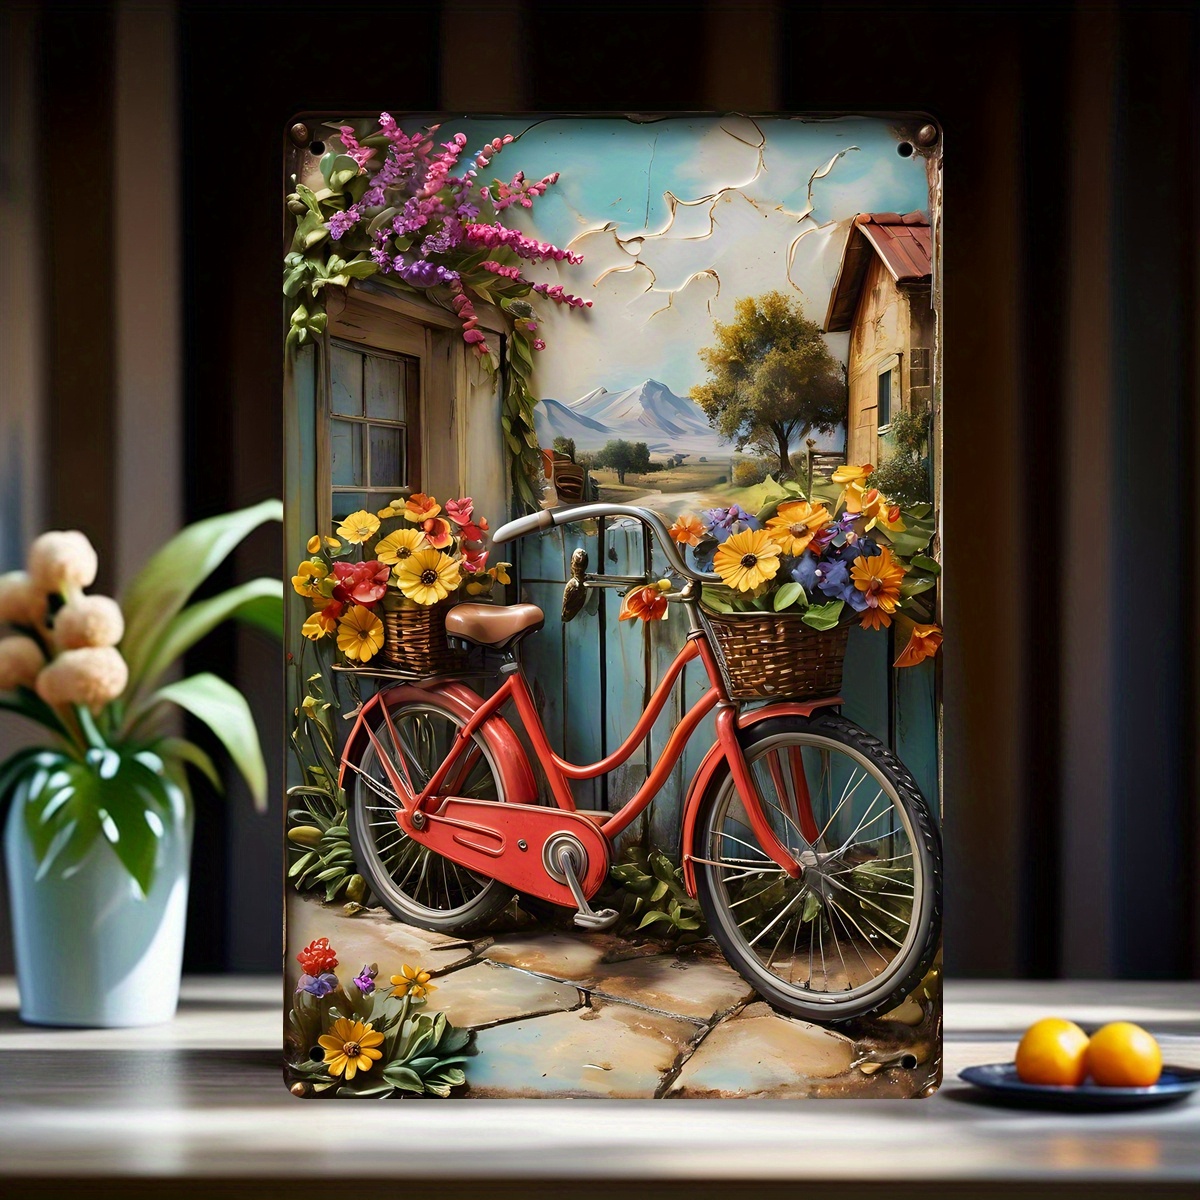 

Aluminum Wall Art Decor Sign - Vintage Bicycle With Flowers Embossed Metal Sign (8x12 Inches) - Ideal For Home, Cafe, Man Cave, Bar, Office, And Club Wall Decor